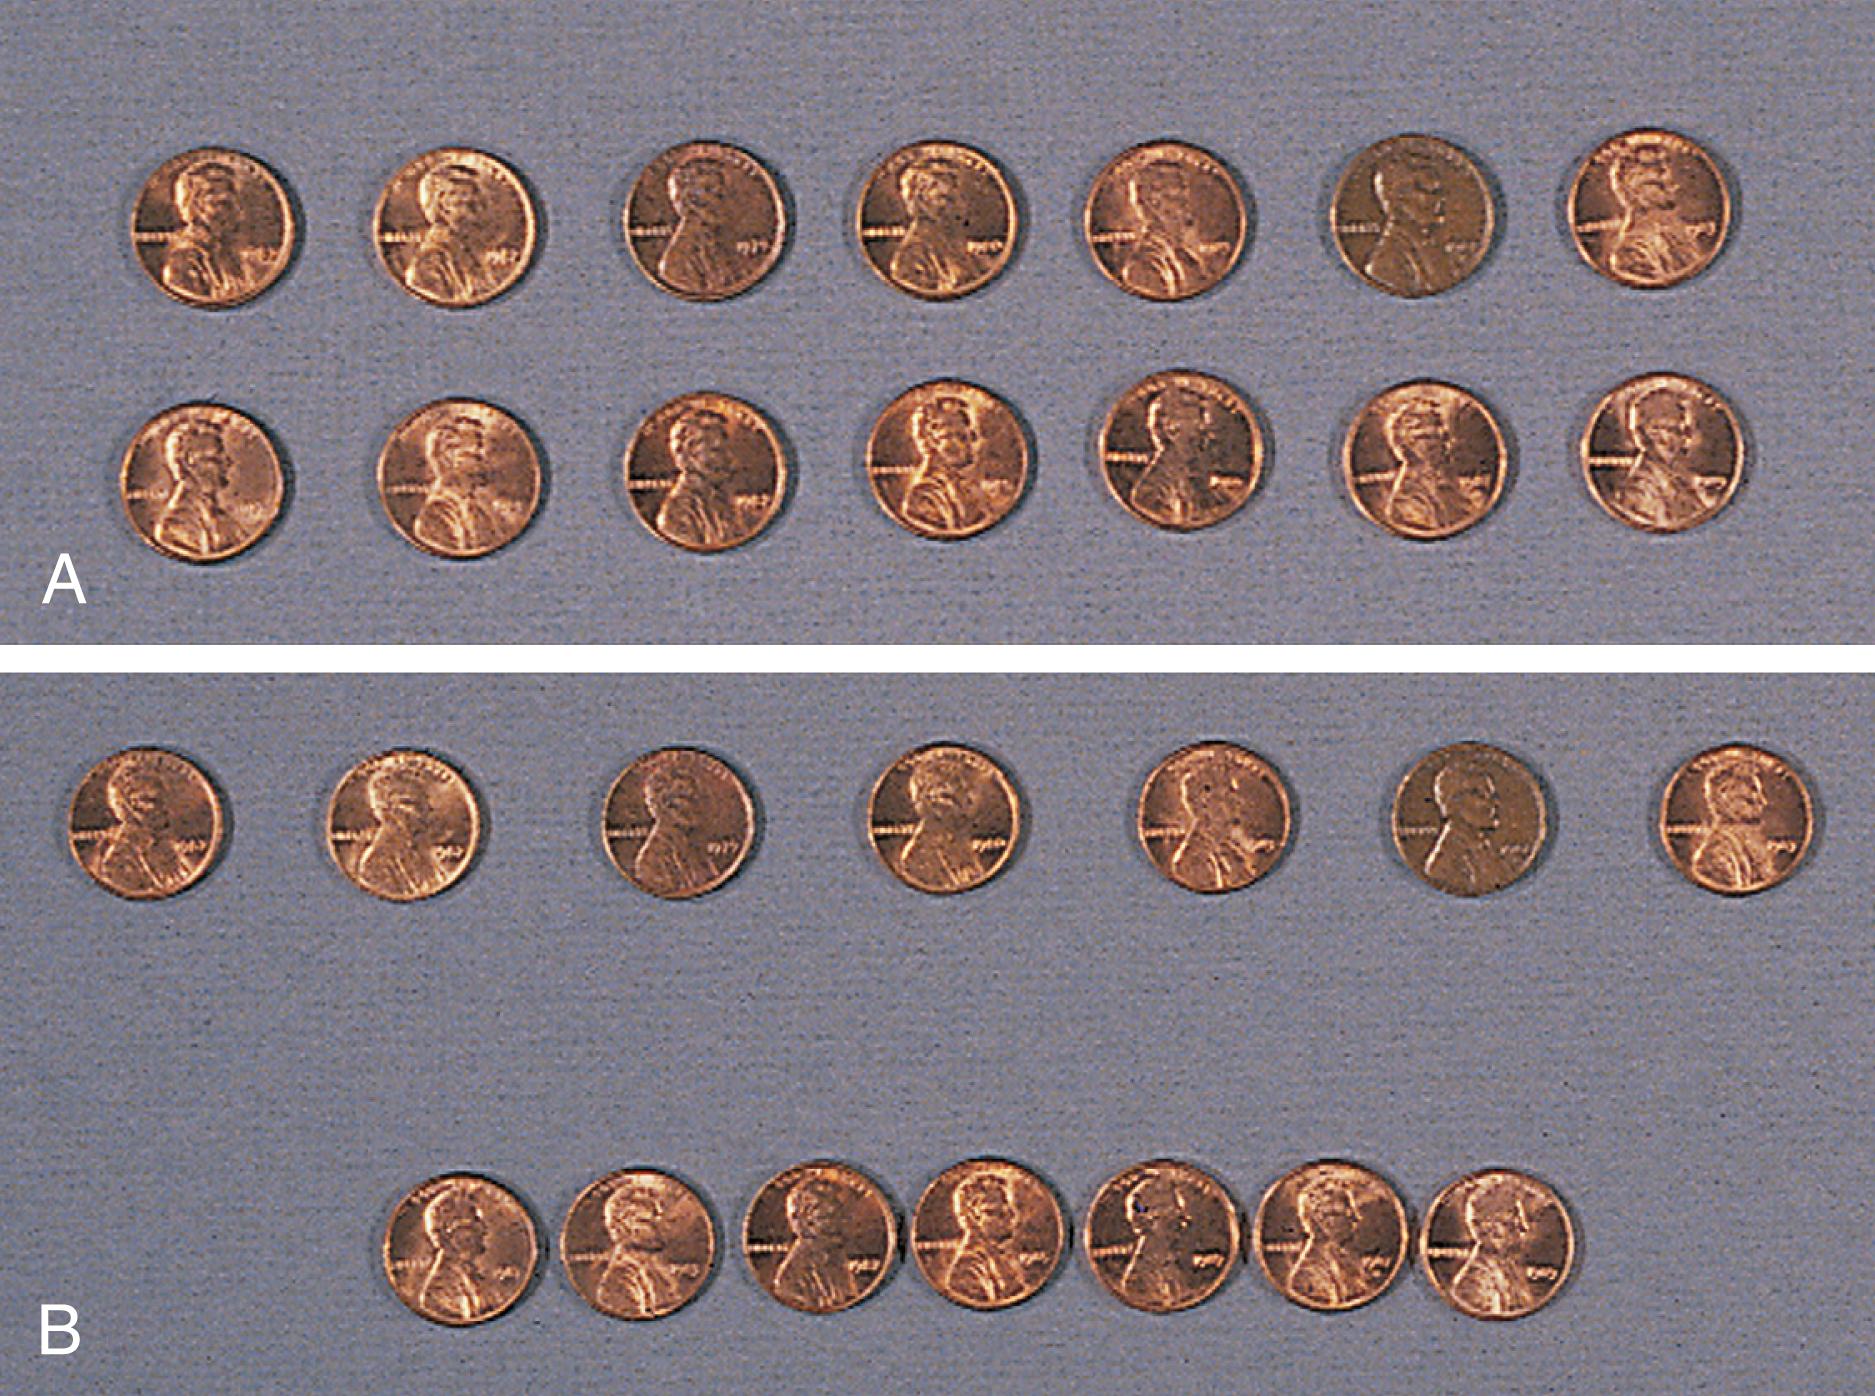 Fig. 3.26, Experimental design to demonstrate preoperational logic. The 3- or 4-year-old child agrees that the two rows in (A) have the same number of pennies. After seeing the pennies moved into the configuration in (B), the child claims that the top row has more because it is longer.